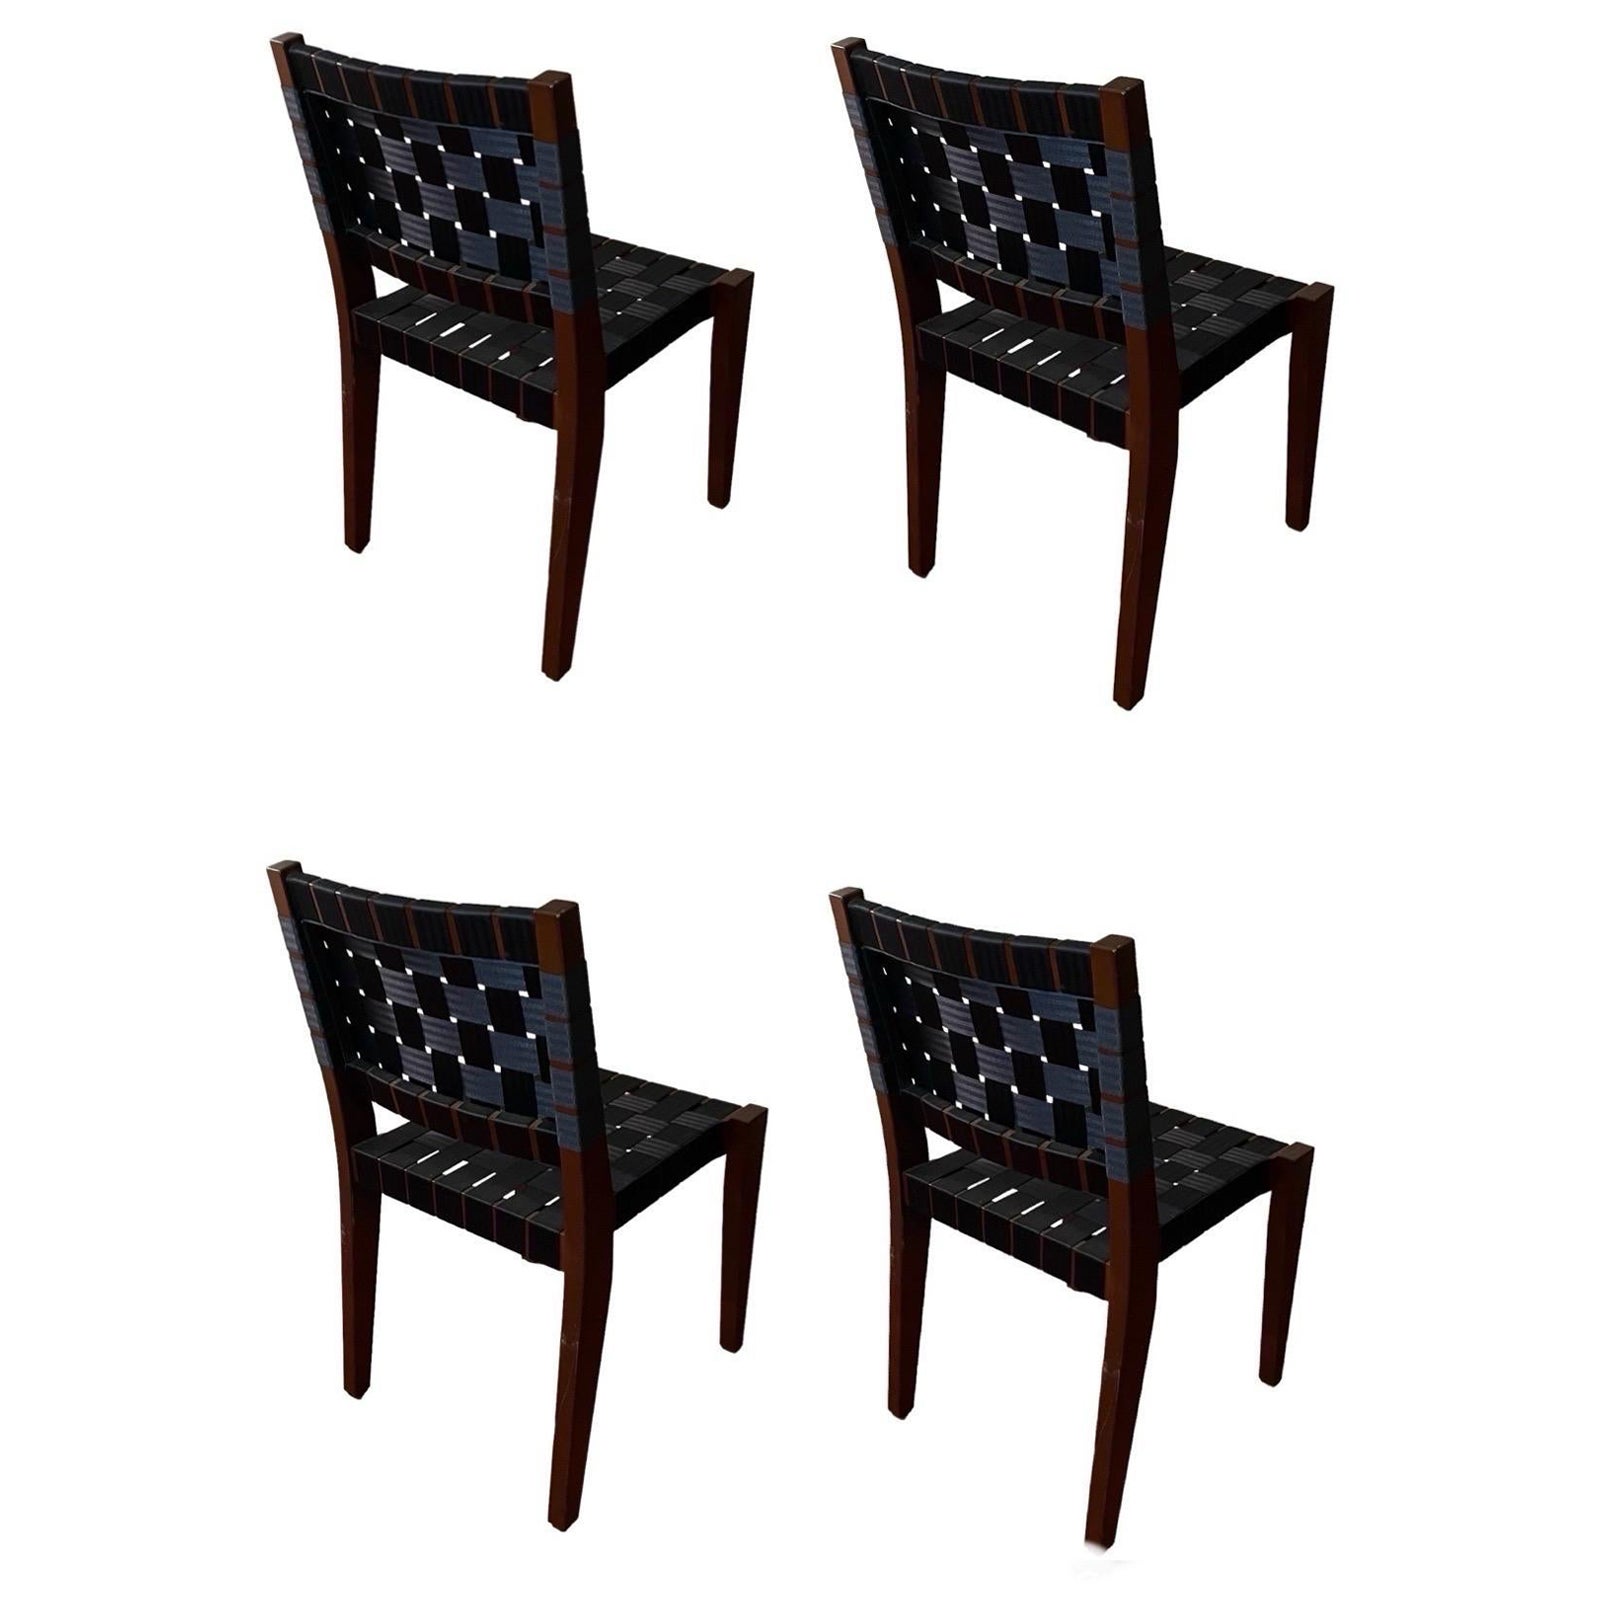 Peter Danko Ashton Side Chairs With Navy Blue Woven Seat & Back, Set of 4 For Sale